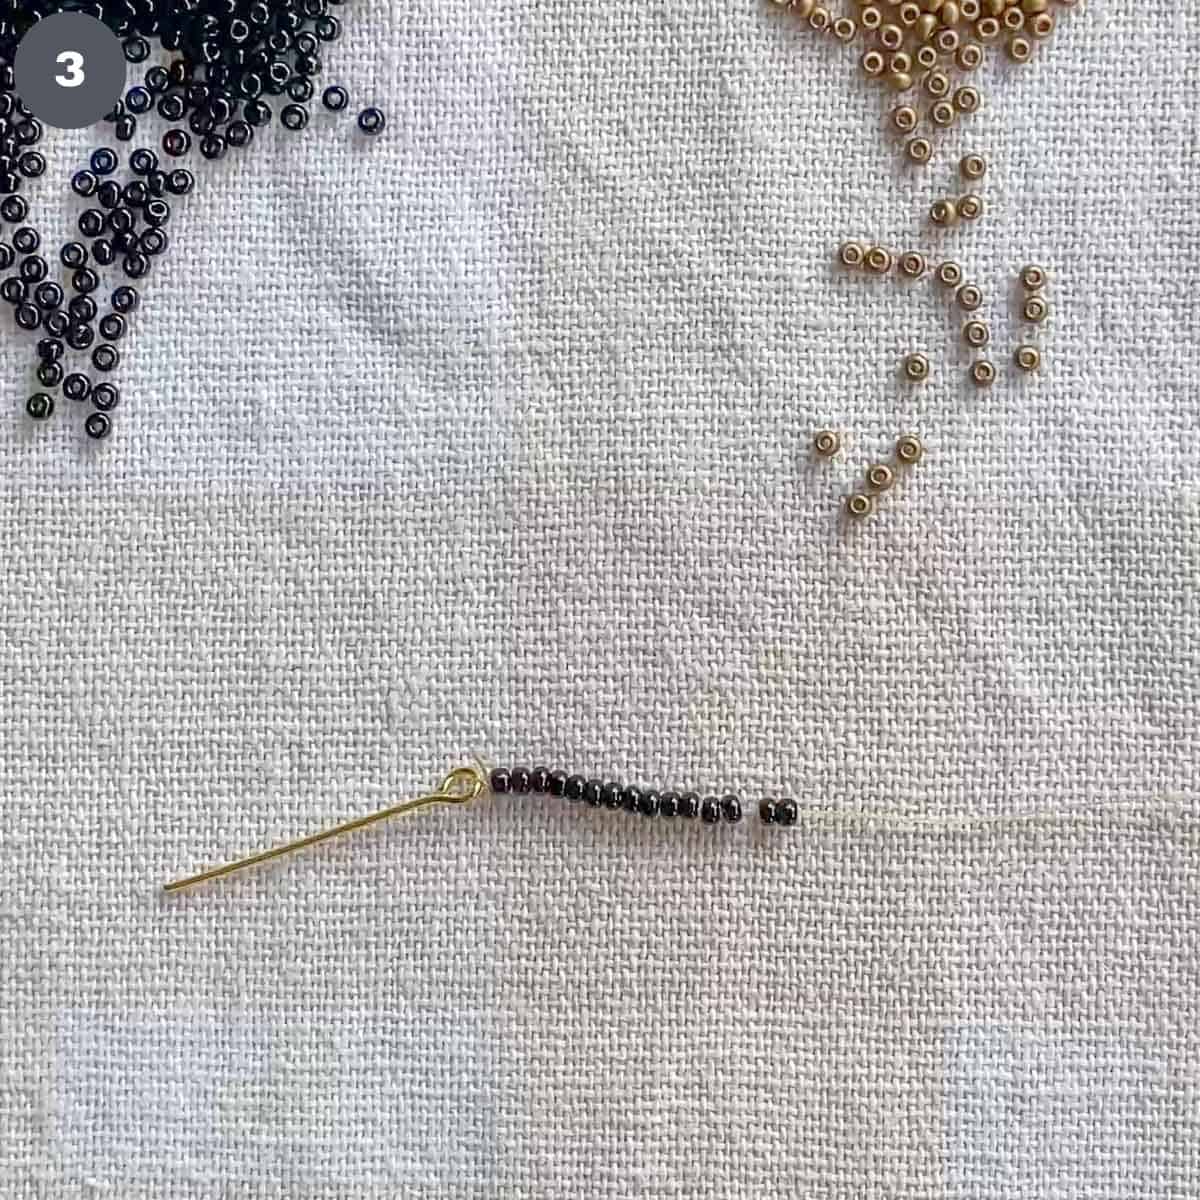 A strand of black seed beads attached to an eye pin.